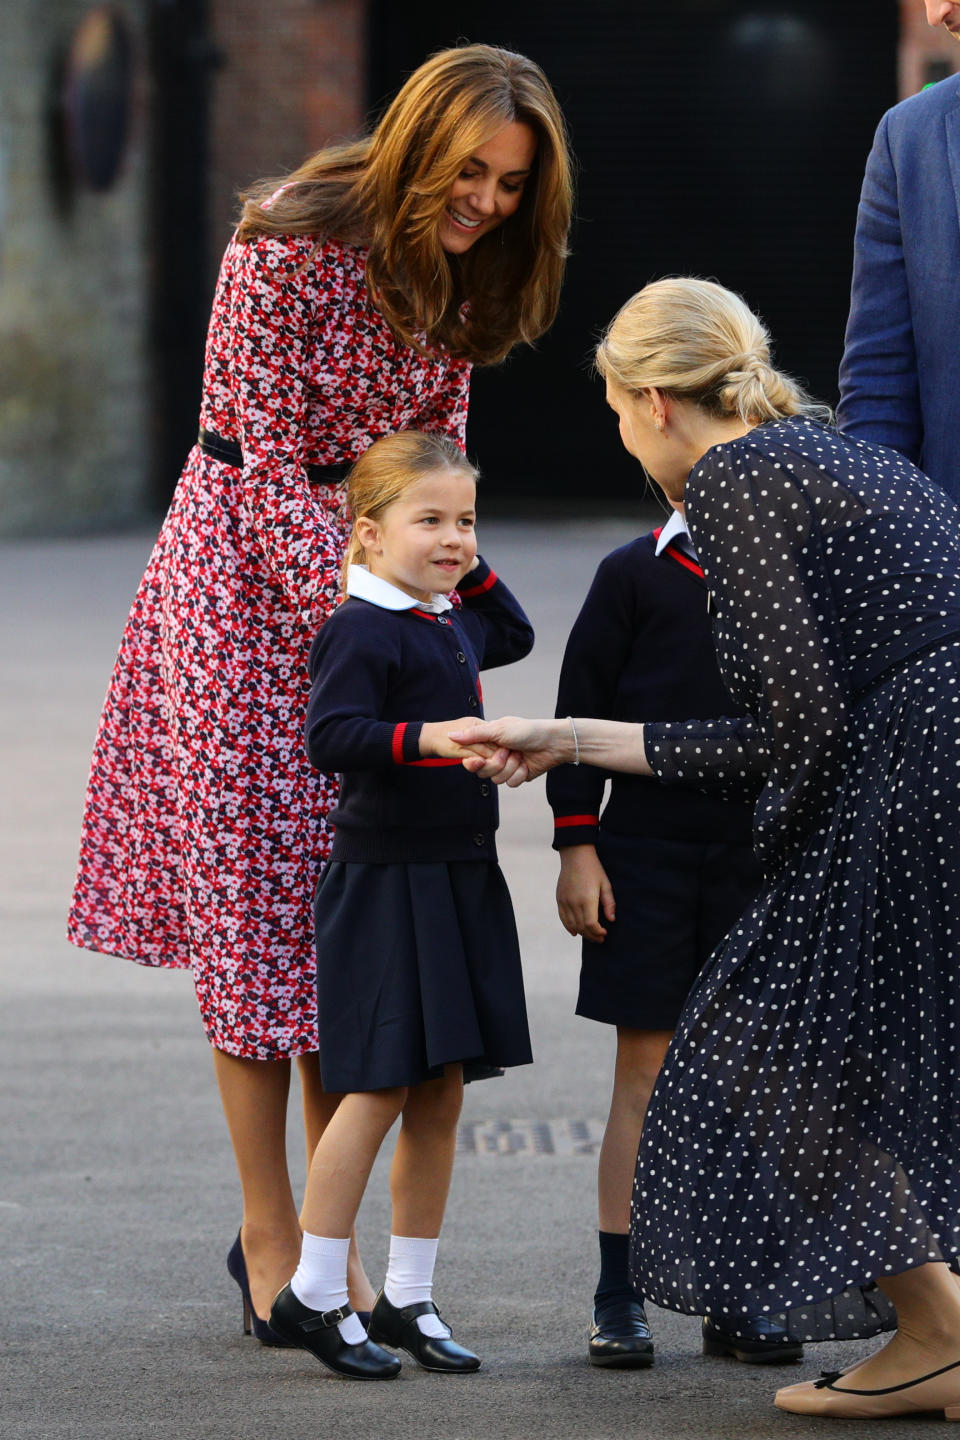 LONDON, UNITED KINGDOM - SEPTEMBER 5: Helen Haslem (right), head of the lower school greets Princess Charlotte as she arrives for her first day of school, with her brother Prince George and her parents the Duke and Duchess of Cambridge, at Thomas's Battersea in London on September 5, 2019 in London, England. (Photo by Aaron Chown - WPA Pool/Getty Images)